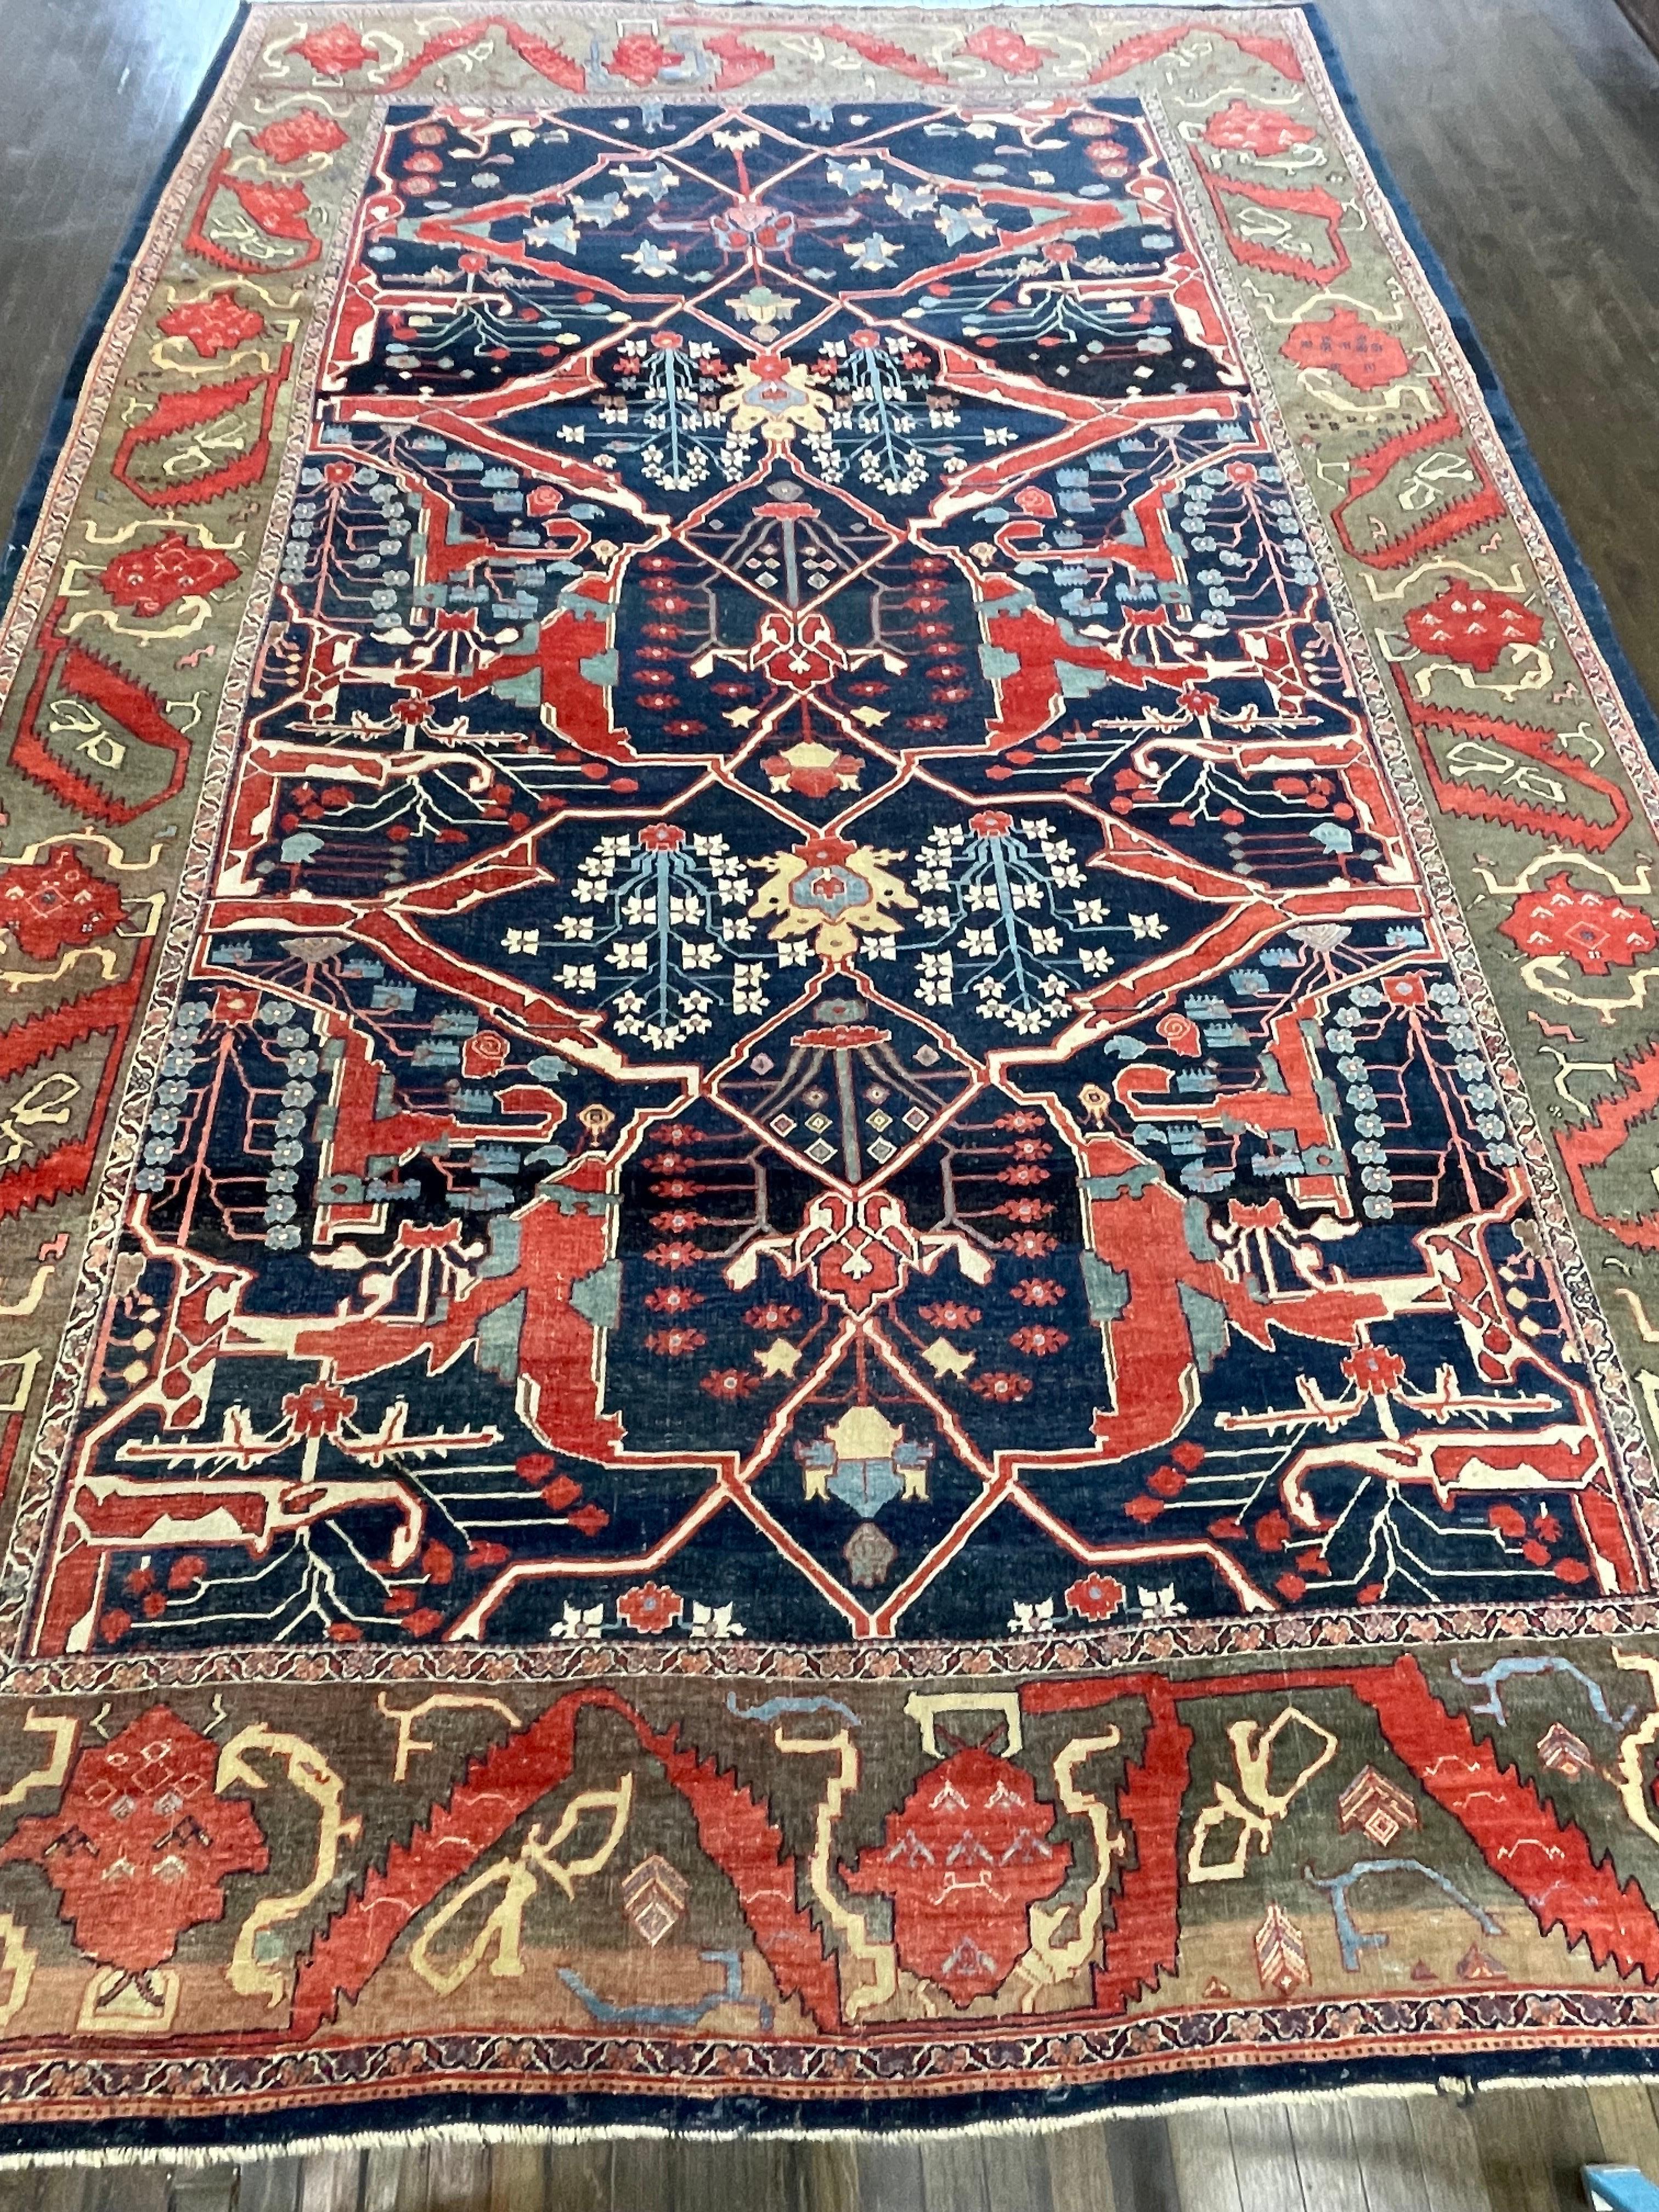 Handwoven in the town of Bijar, located in west of Persia, this rug is made with high quality wool used both for the foundation and pile. One of the most sought after designs of antique Persian rugs this Garrus Bidjar is truly an excellent example